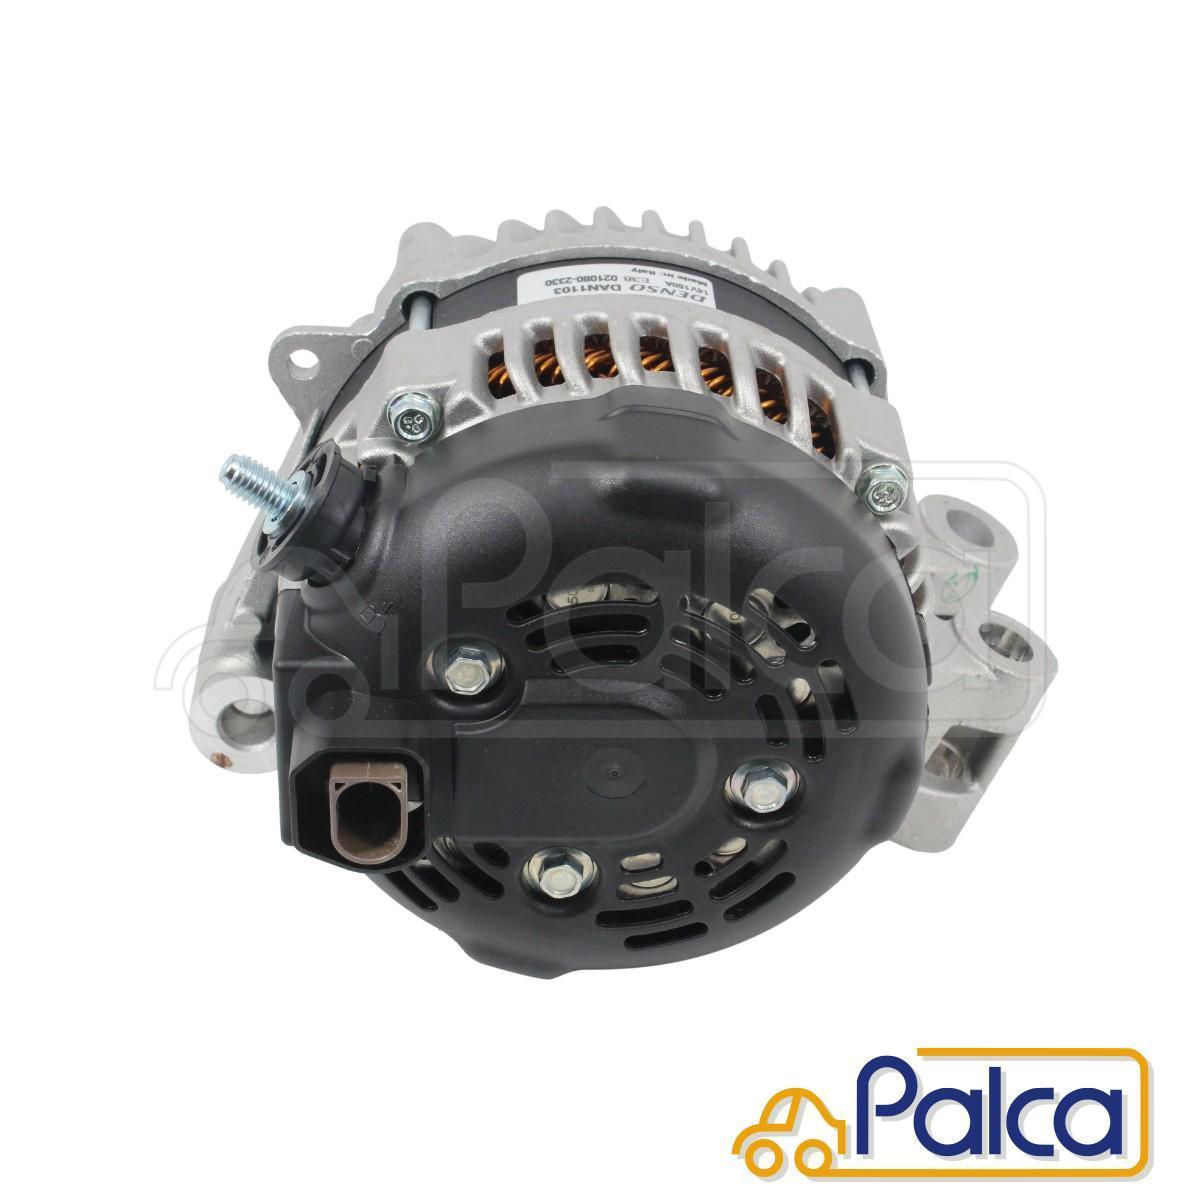  Jaguar alternator 150A| XE/X760 | XF/X250 X260 | XJ/X351 | XK/X150 | F type /X152 | F pace /X761 | 3.0L/5.0L for | DENSO made 